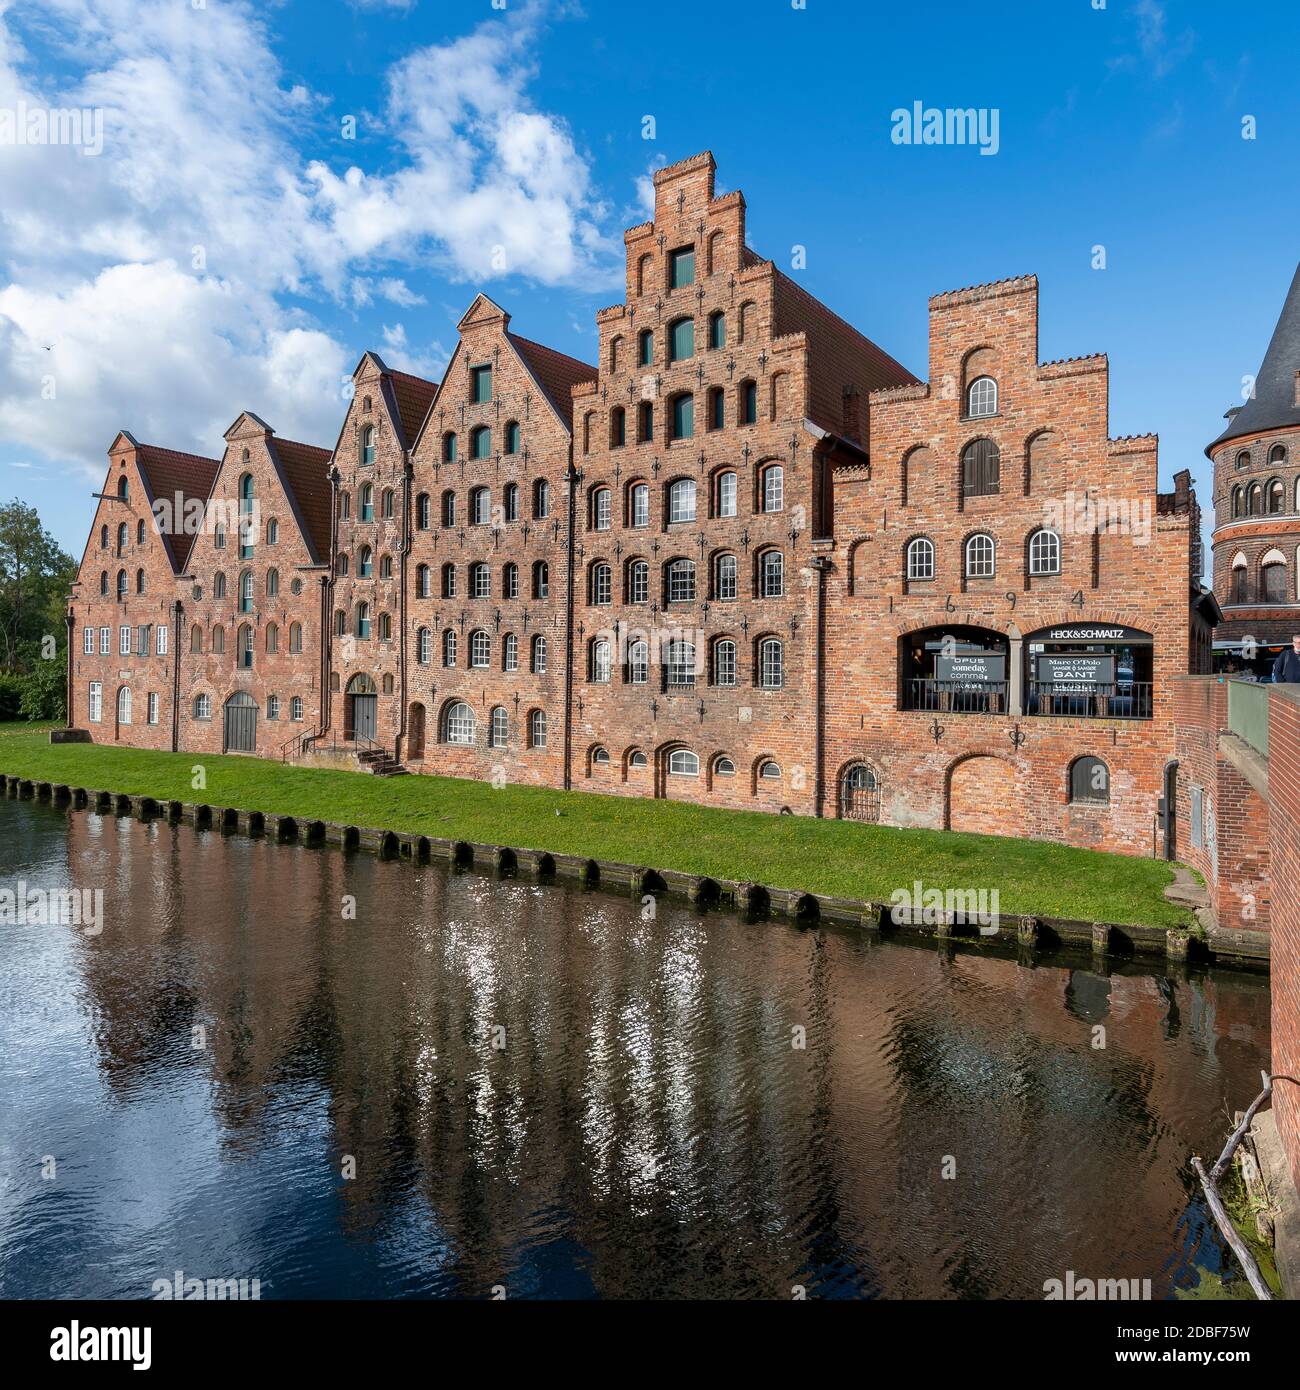 The Salzspeicher (salt storehouses), in Lübeck, northern Germany. Six historic brick buildings on the Upper Trave River next to the Holstentor. Stock Photo